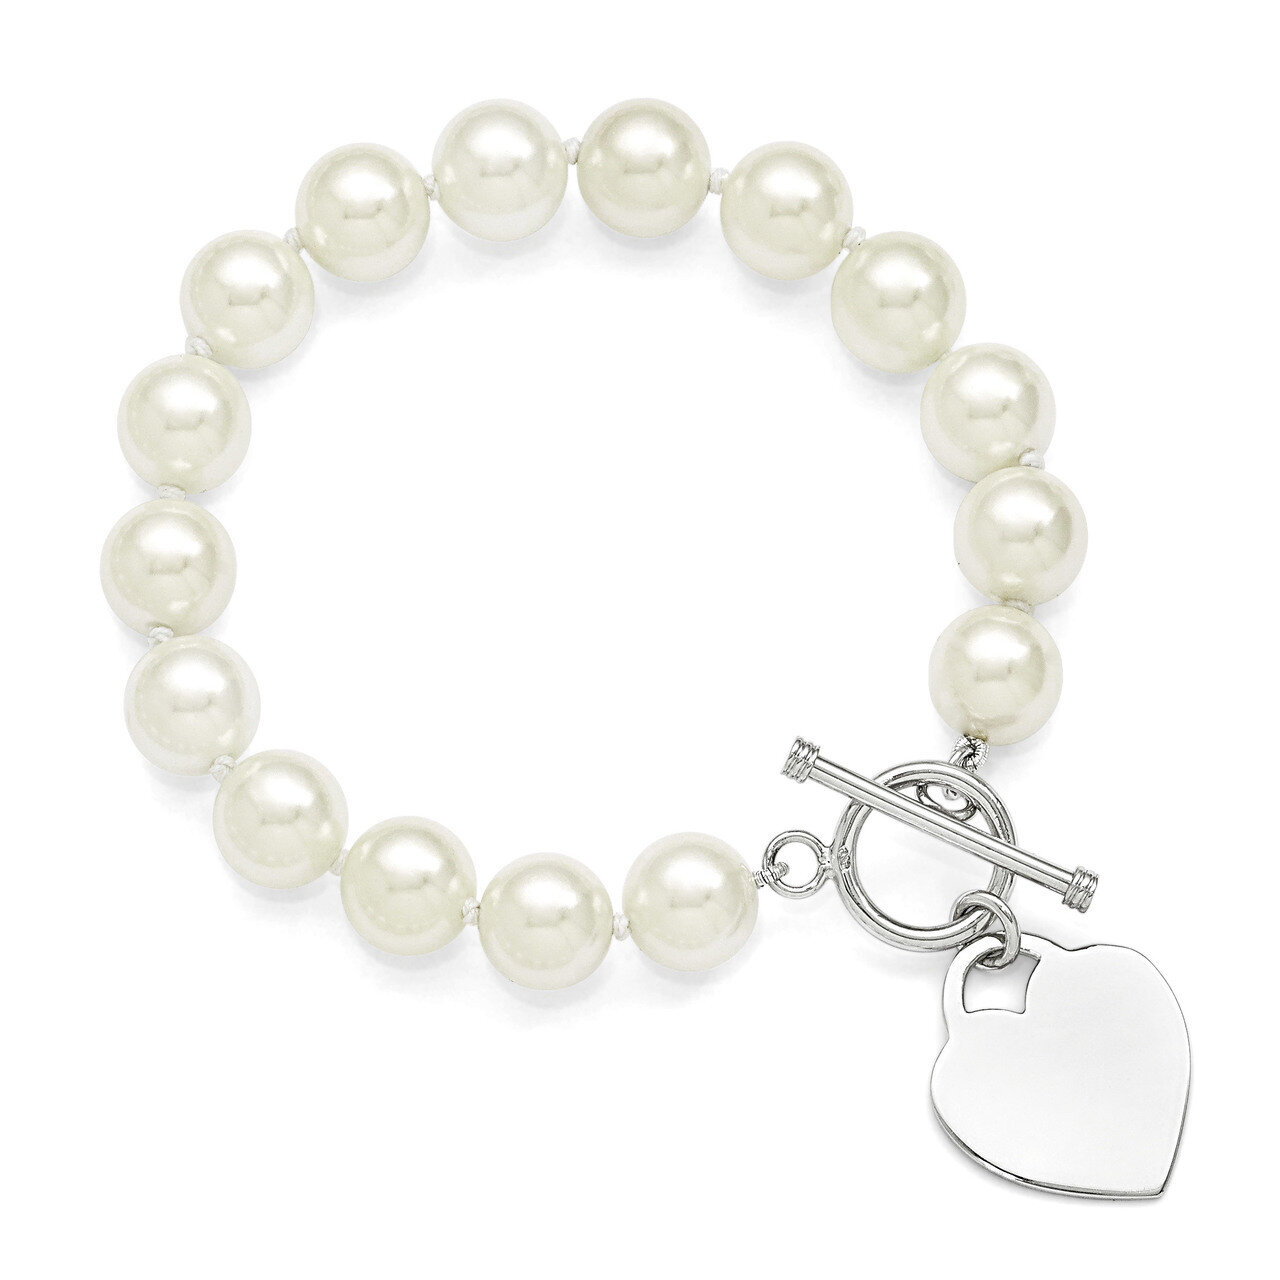 10-11Mm White Shell Bead with Eng. Heart Bracelet Sterling Silver QMJB102W-8